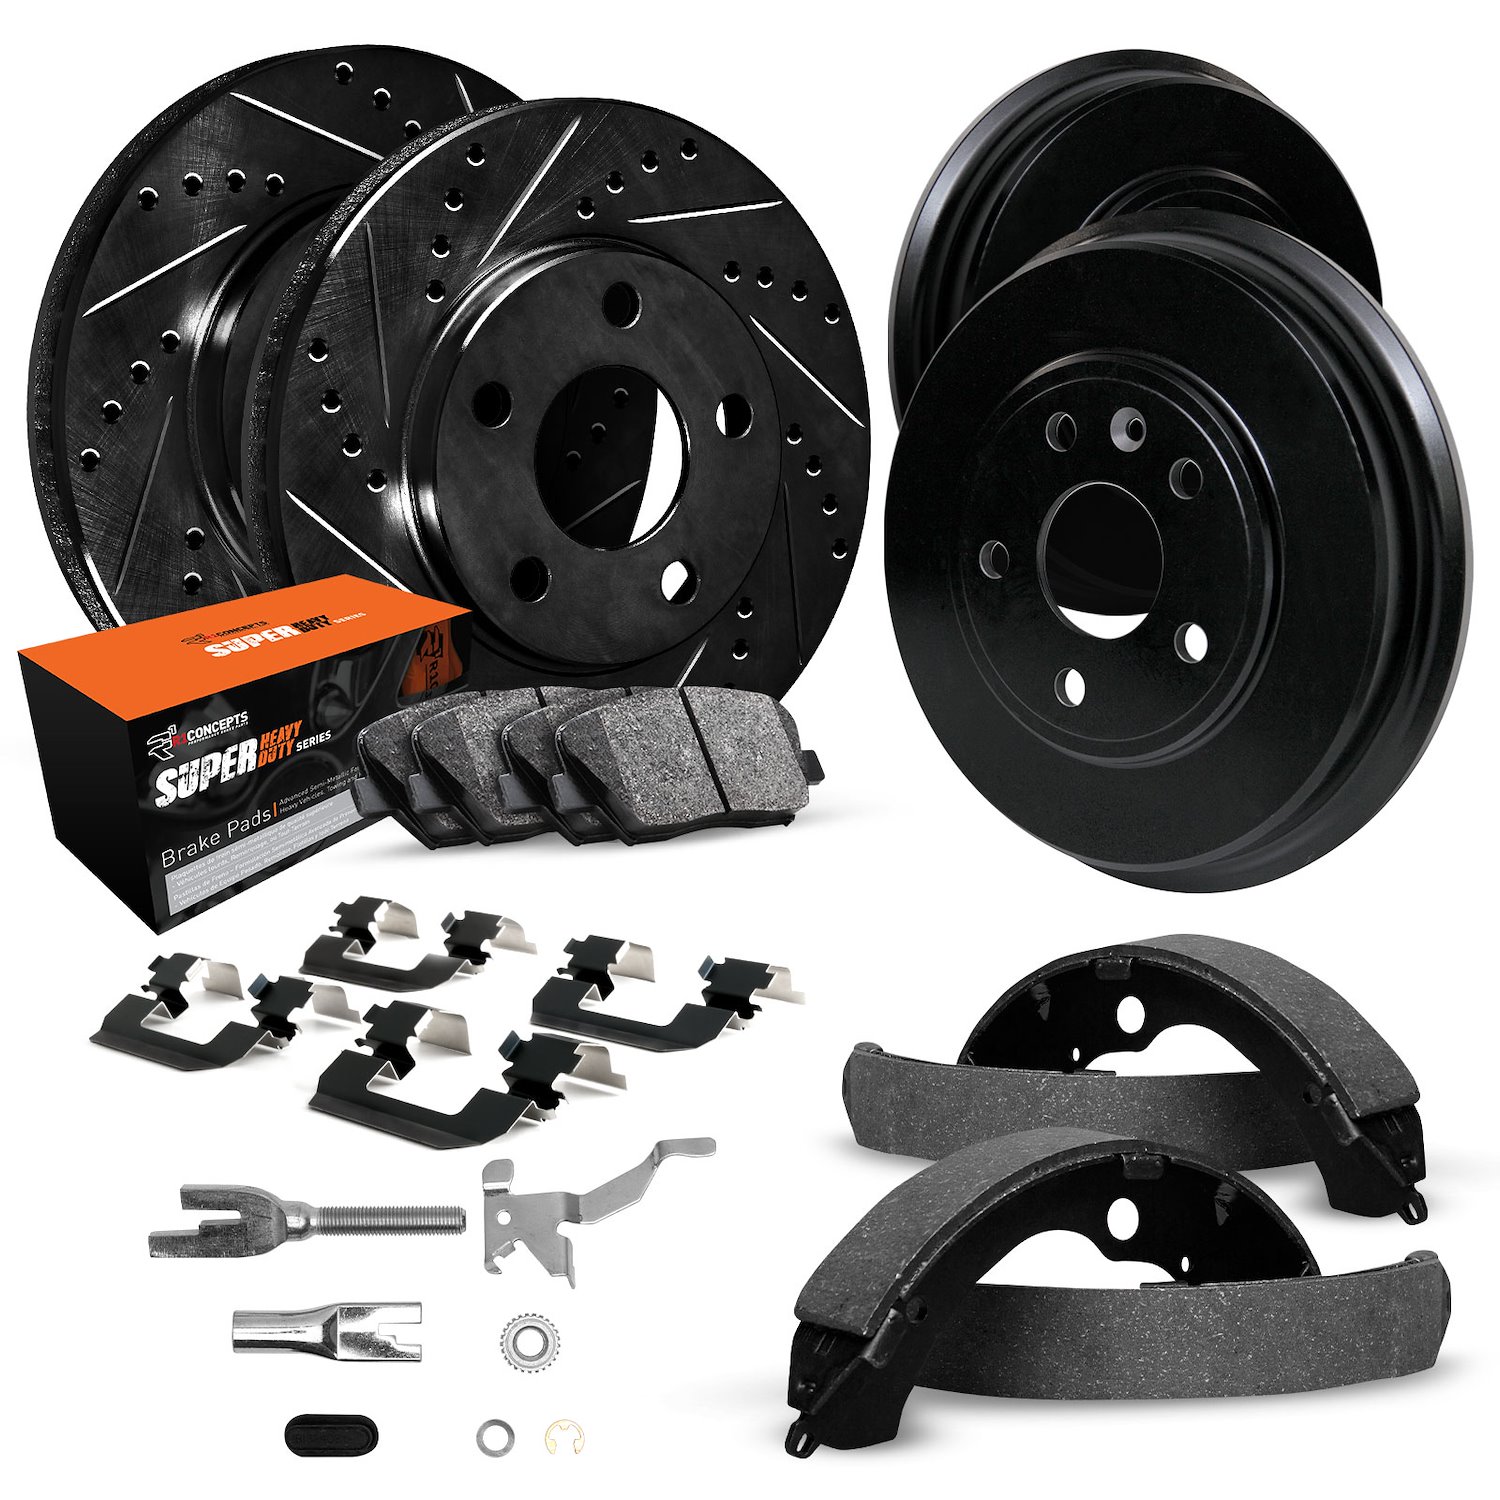 E-Line Drilled/Slotted Black Rotor & Drum Set w/Super-Duty Pads, Shoes, Hardware/Adjusters, 1978-1979 Ford/Lincoln/Mercury/Mazda